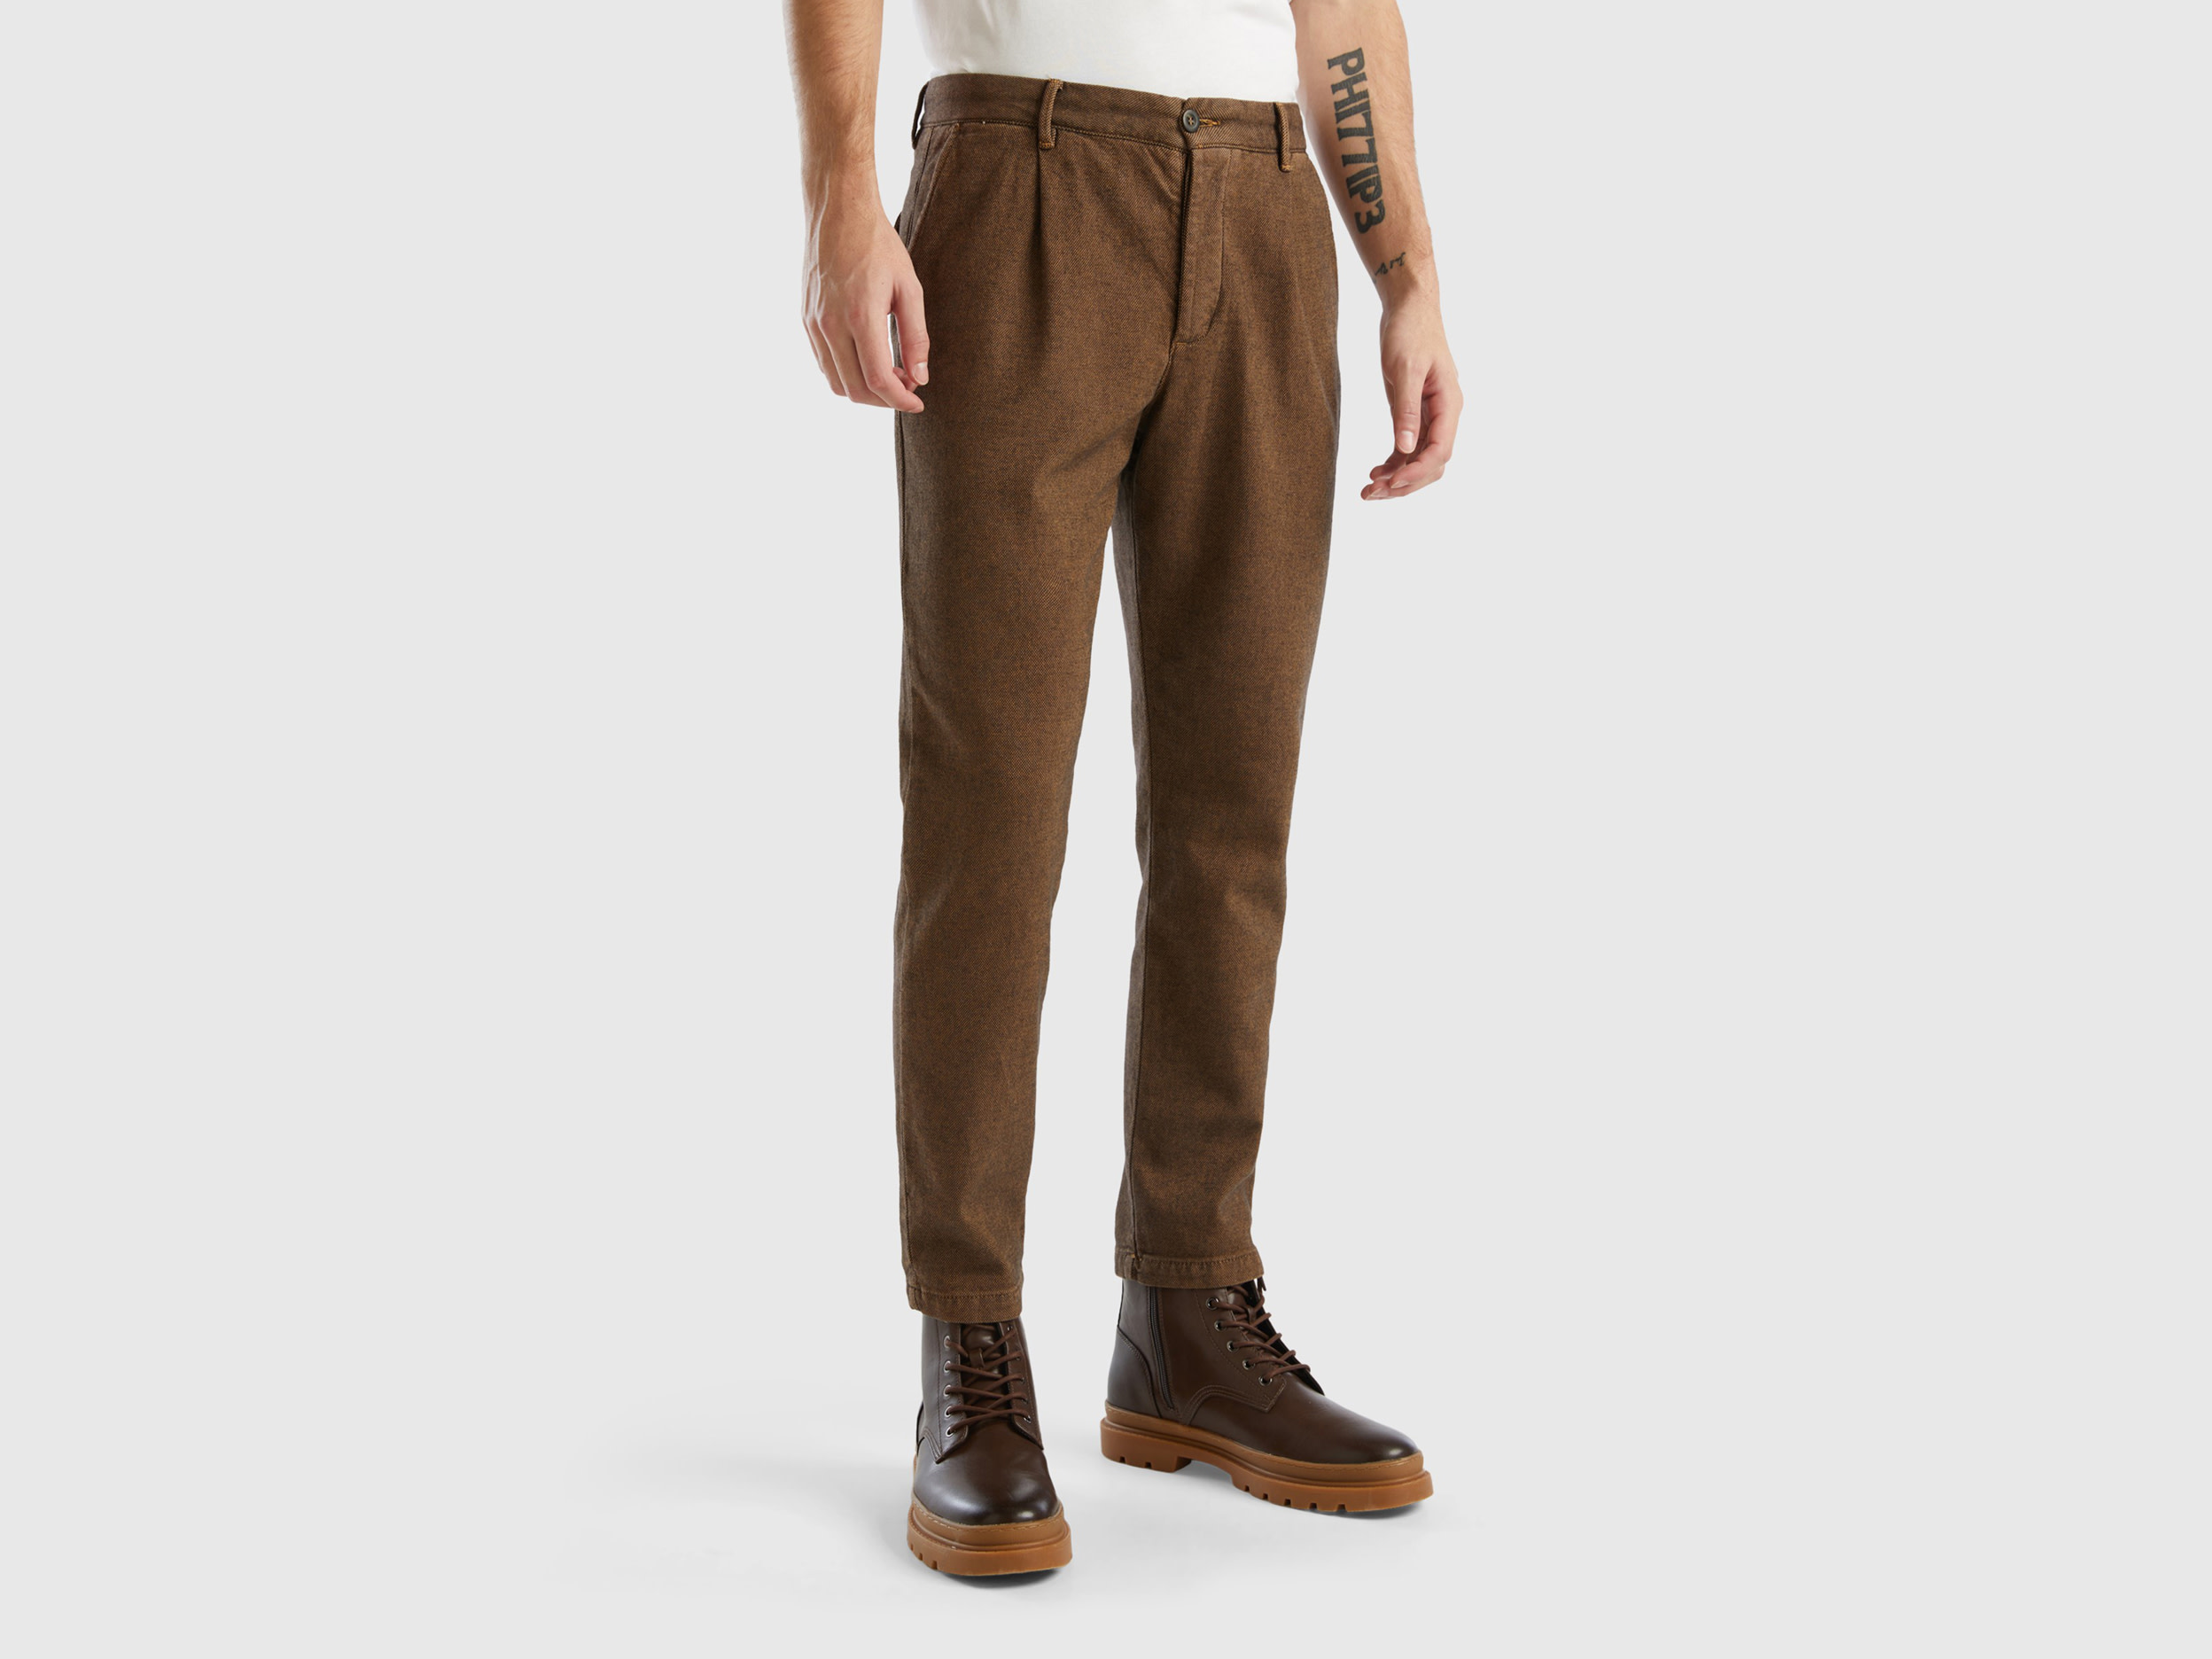 Benetton, Patterned Slim Fit Chinos, size 46, Brown, Men